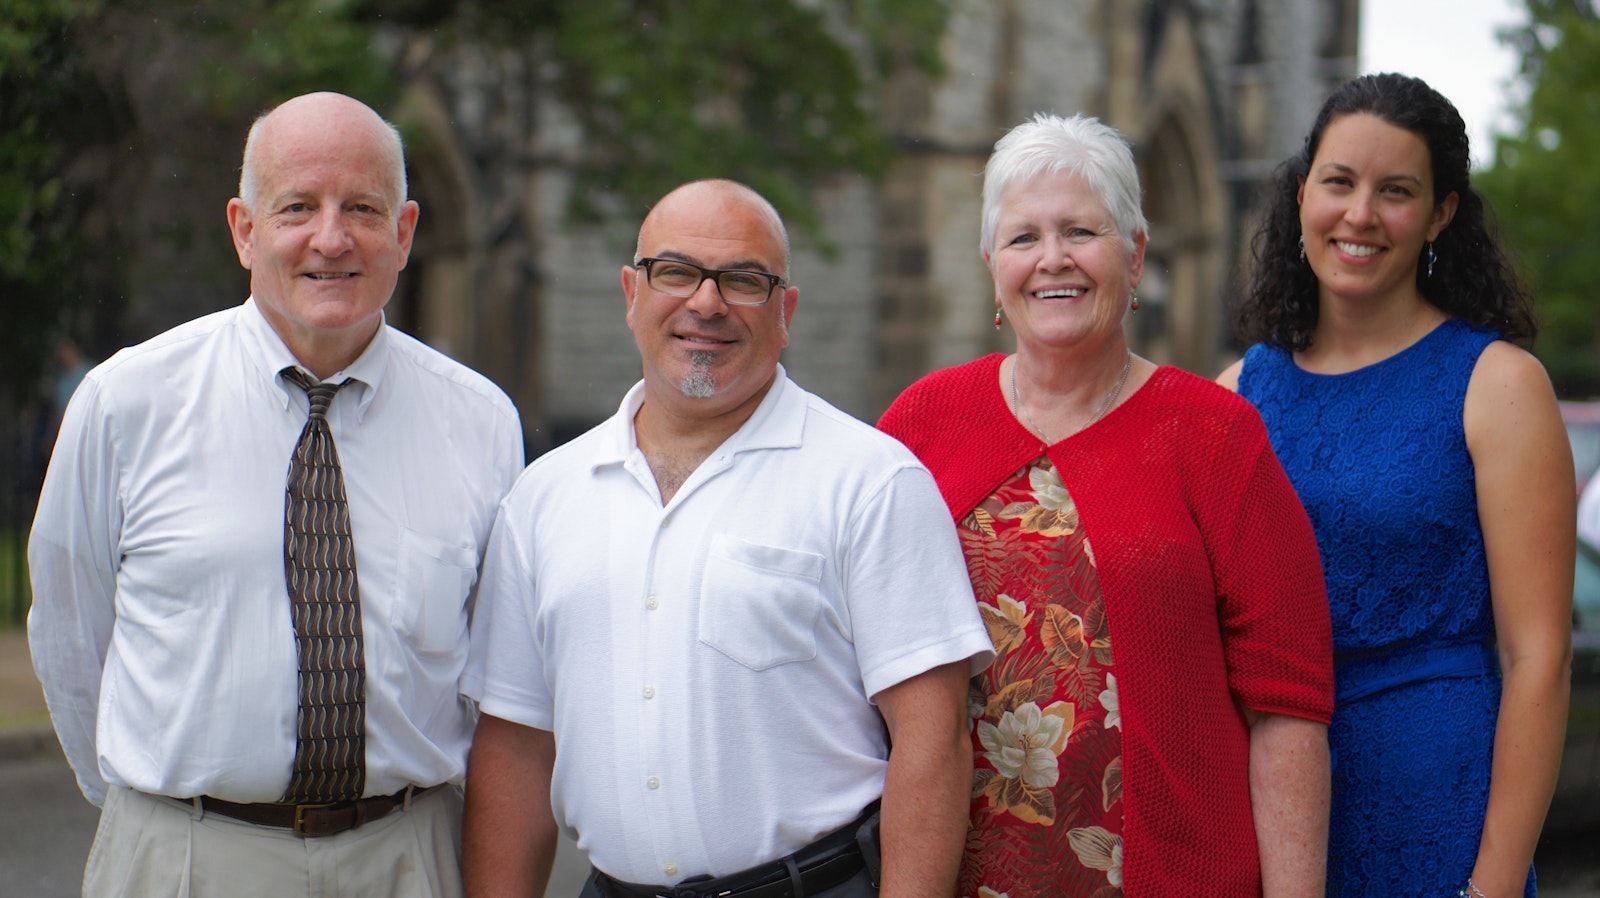 Detroit Mass Mob organizers, left to right, Thom Mann, Anthony Battaglia, the late Annamarie Barnes and Teresa Chisholm stand outside St. Joseph Church in Detroit on June 29, 2014. Not pictured is organizer Jeff Stawasz. (Tim Hinkle | Detroit Catholic file photo)